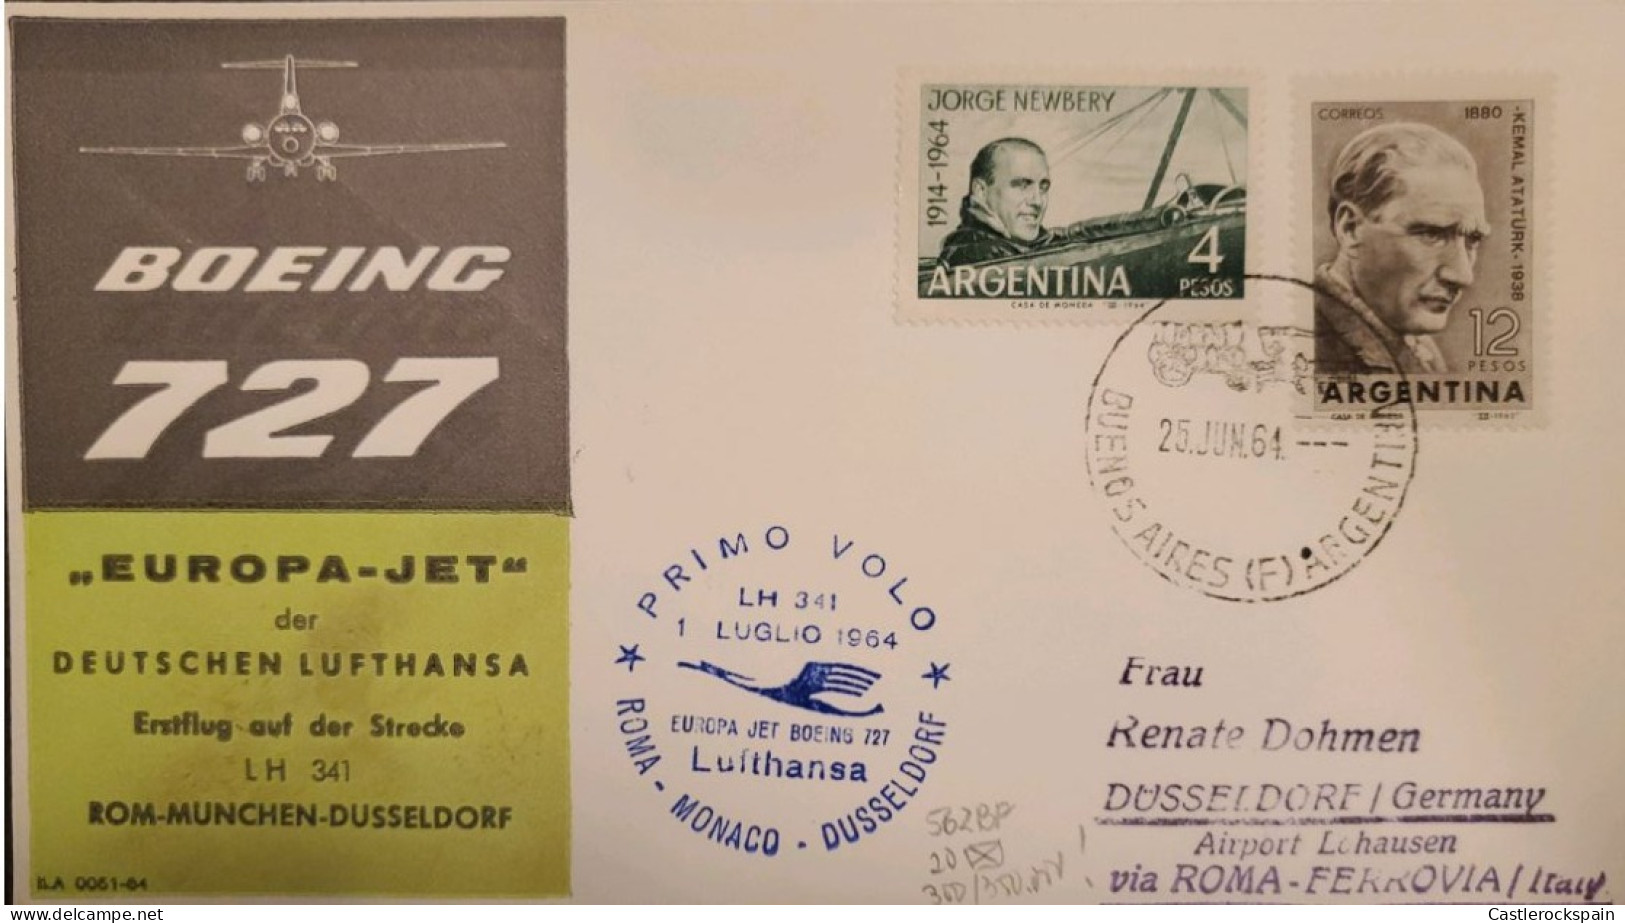 MI) 1964, ARGENTINA, RAILWAY, FROM BUENOS AIRES TO EUROPE - ROME, MONACO, DUSSELDORF, AIR MAIL, AVIATOR JORGE NEWBERY, F - Used Stamps